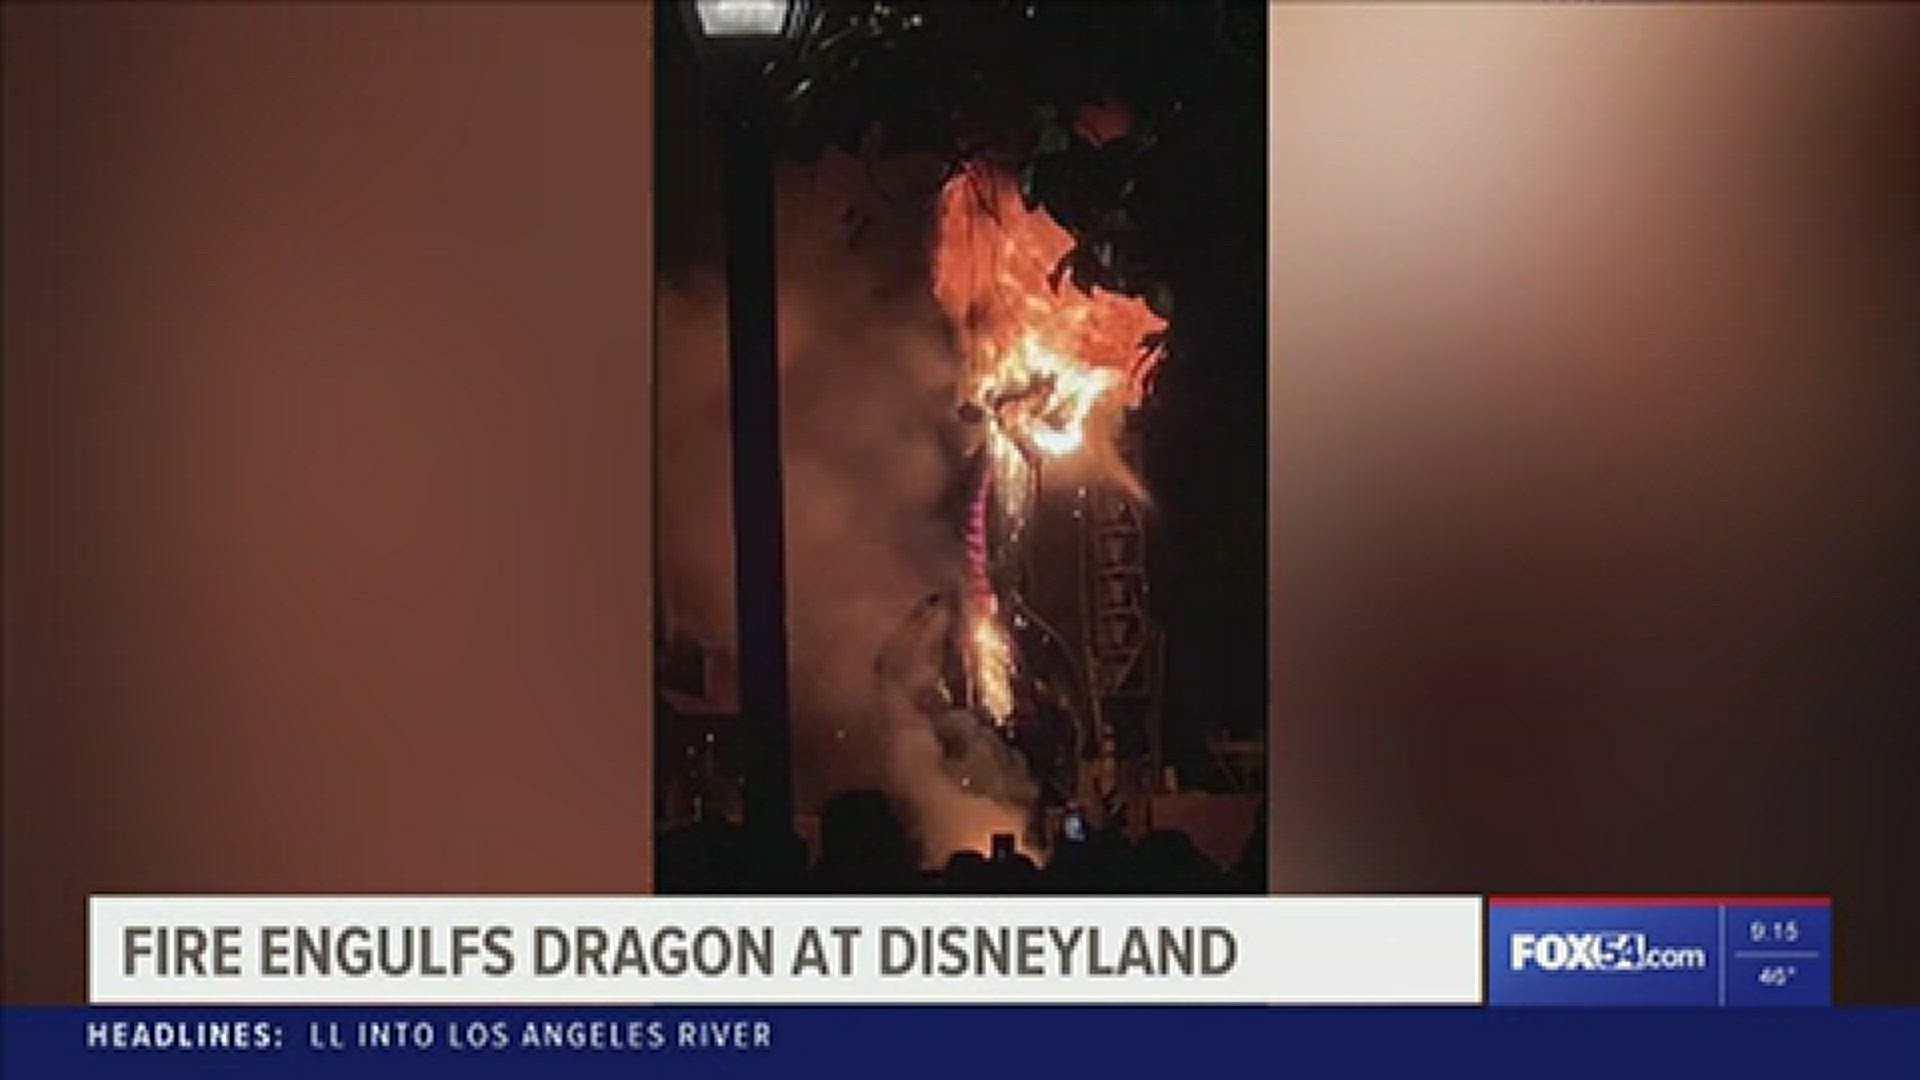 An attraction at Disneyland in California become engulfed in flames Saturday - thankfully, no injuries were reported but the dragon is a little worse for wear.